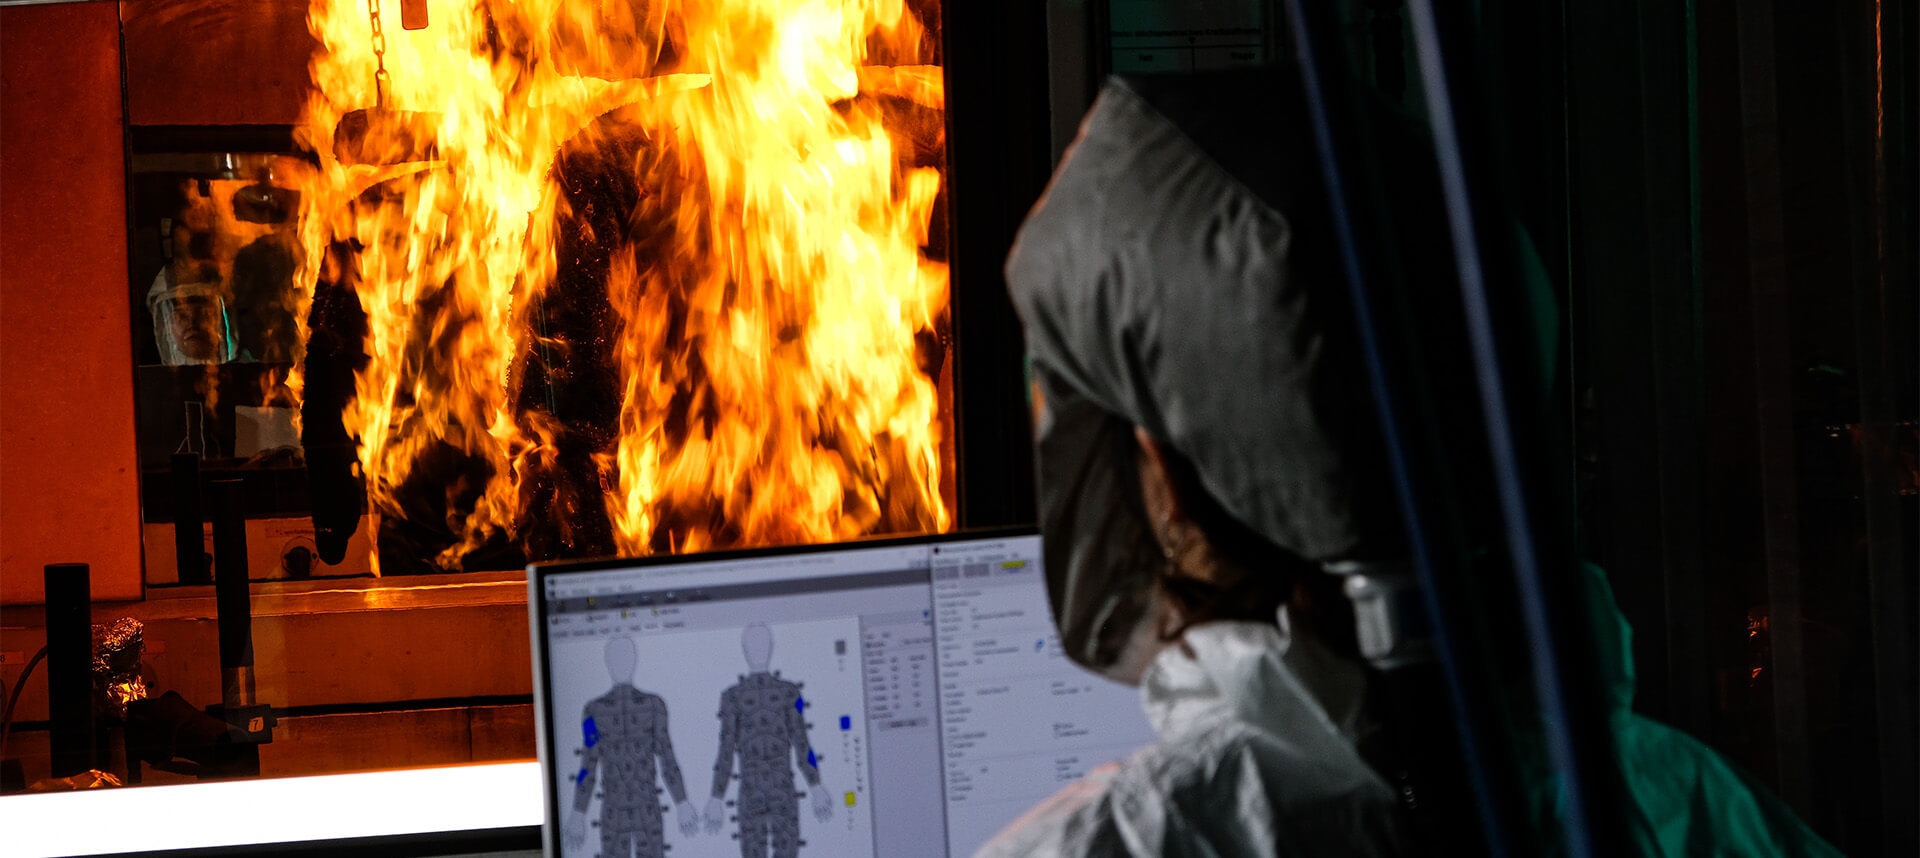 Flame-Resistant Clothing: Critical Facts and Fictions for Propane